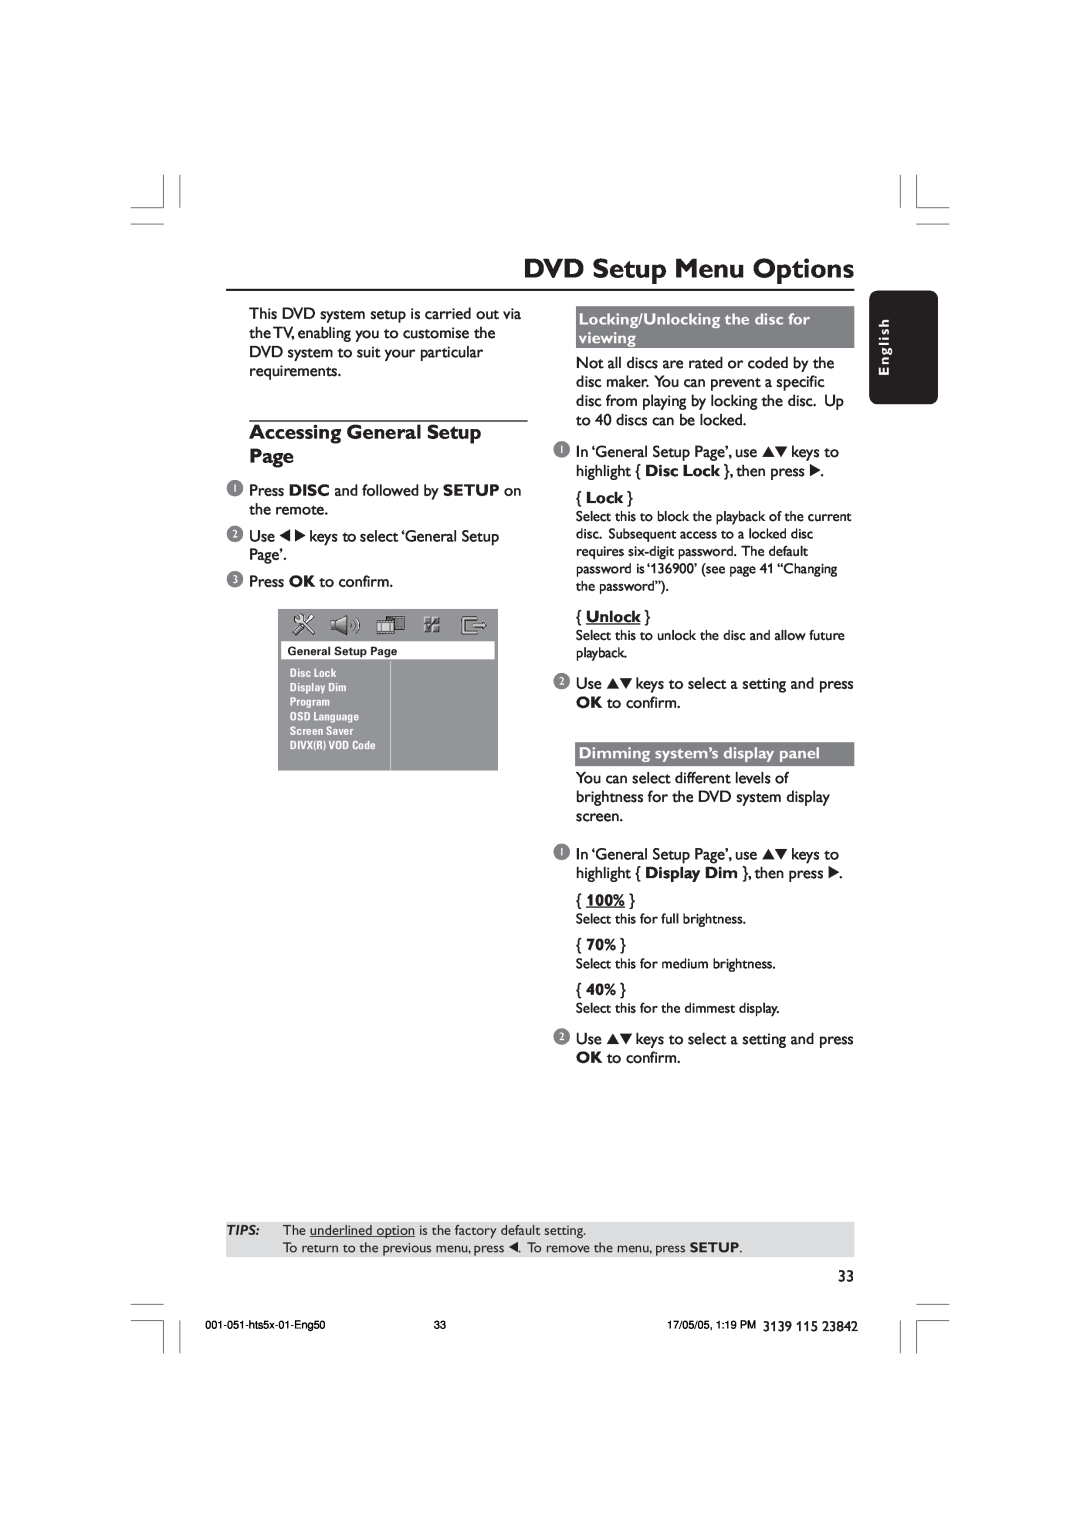 Philips HTS5000W DVD Setup Menu Options, Accessing General Setup Page, Locking/Unlocking the disc for viewing, 100% 